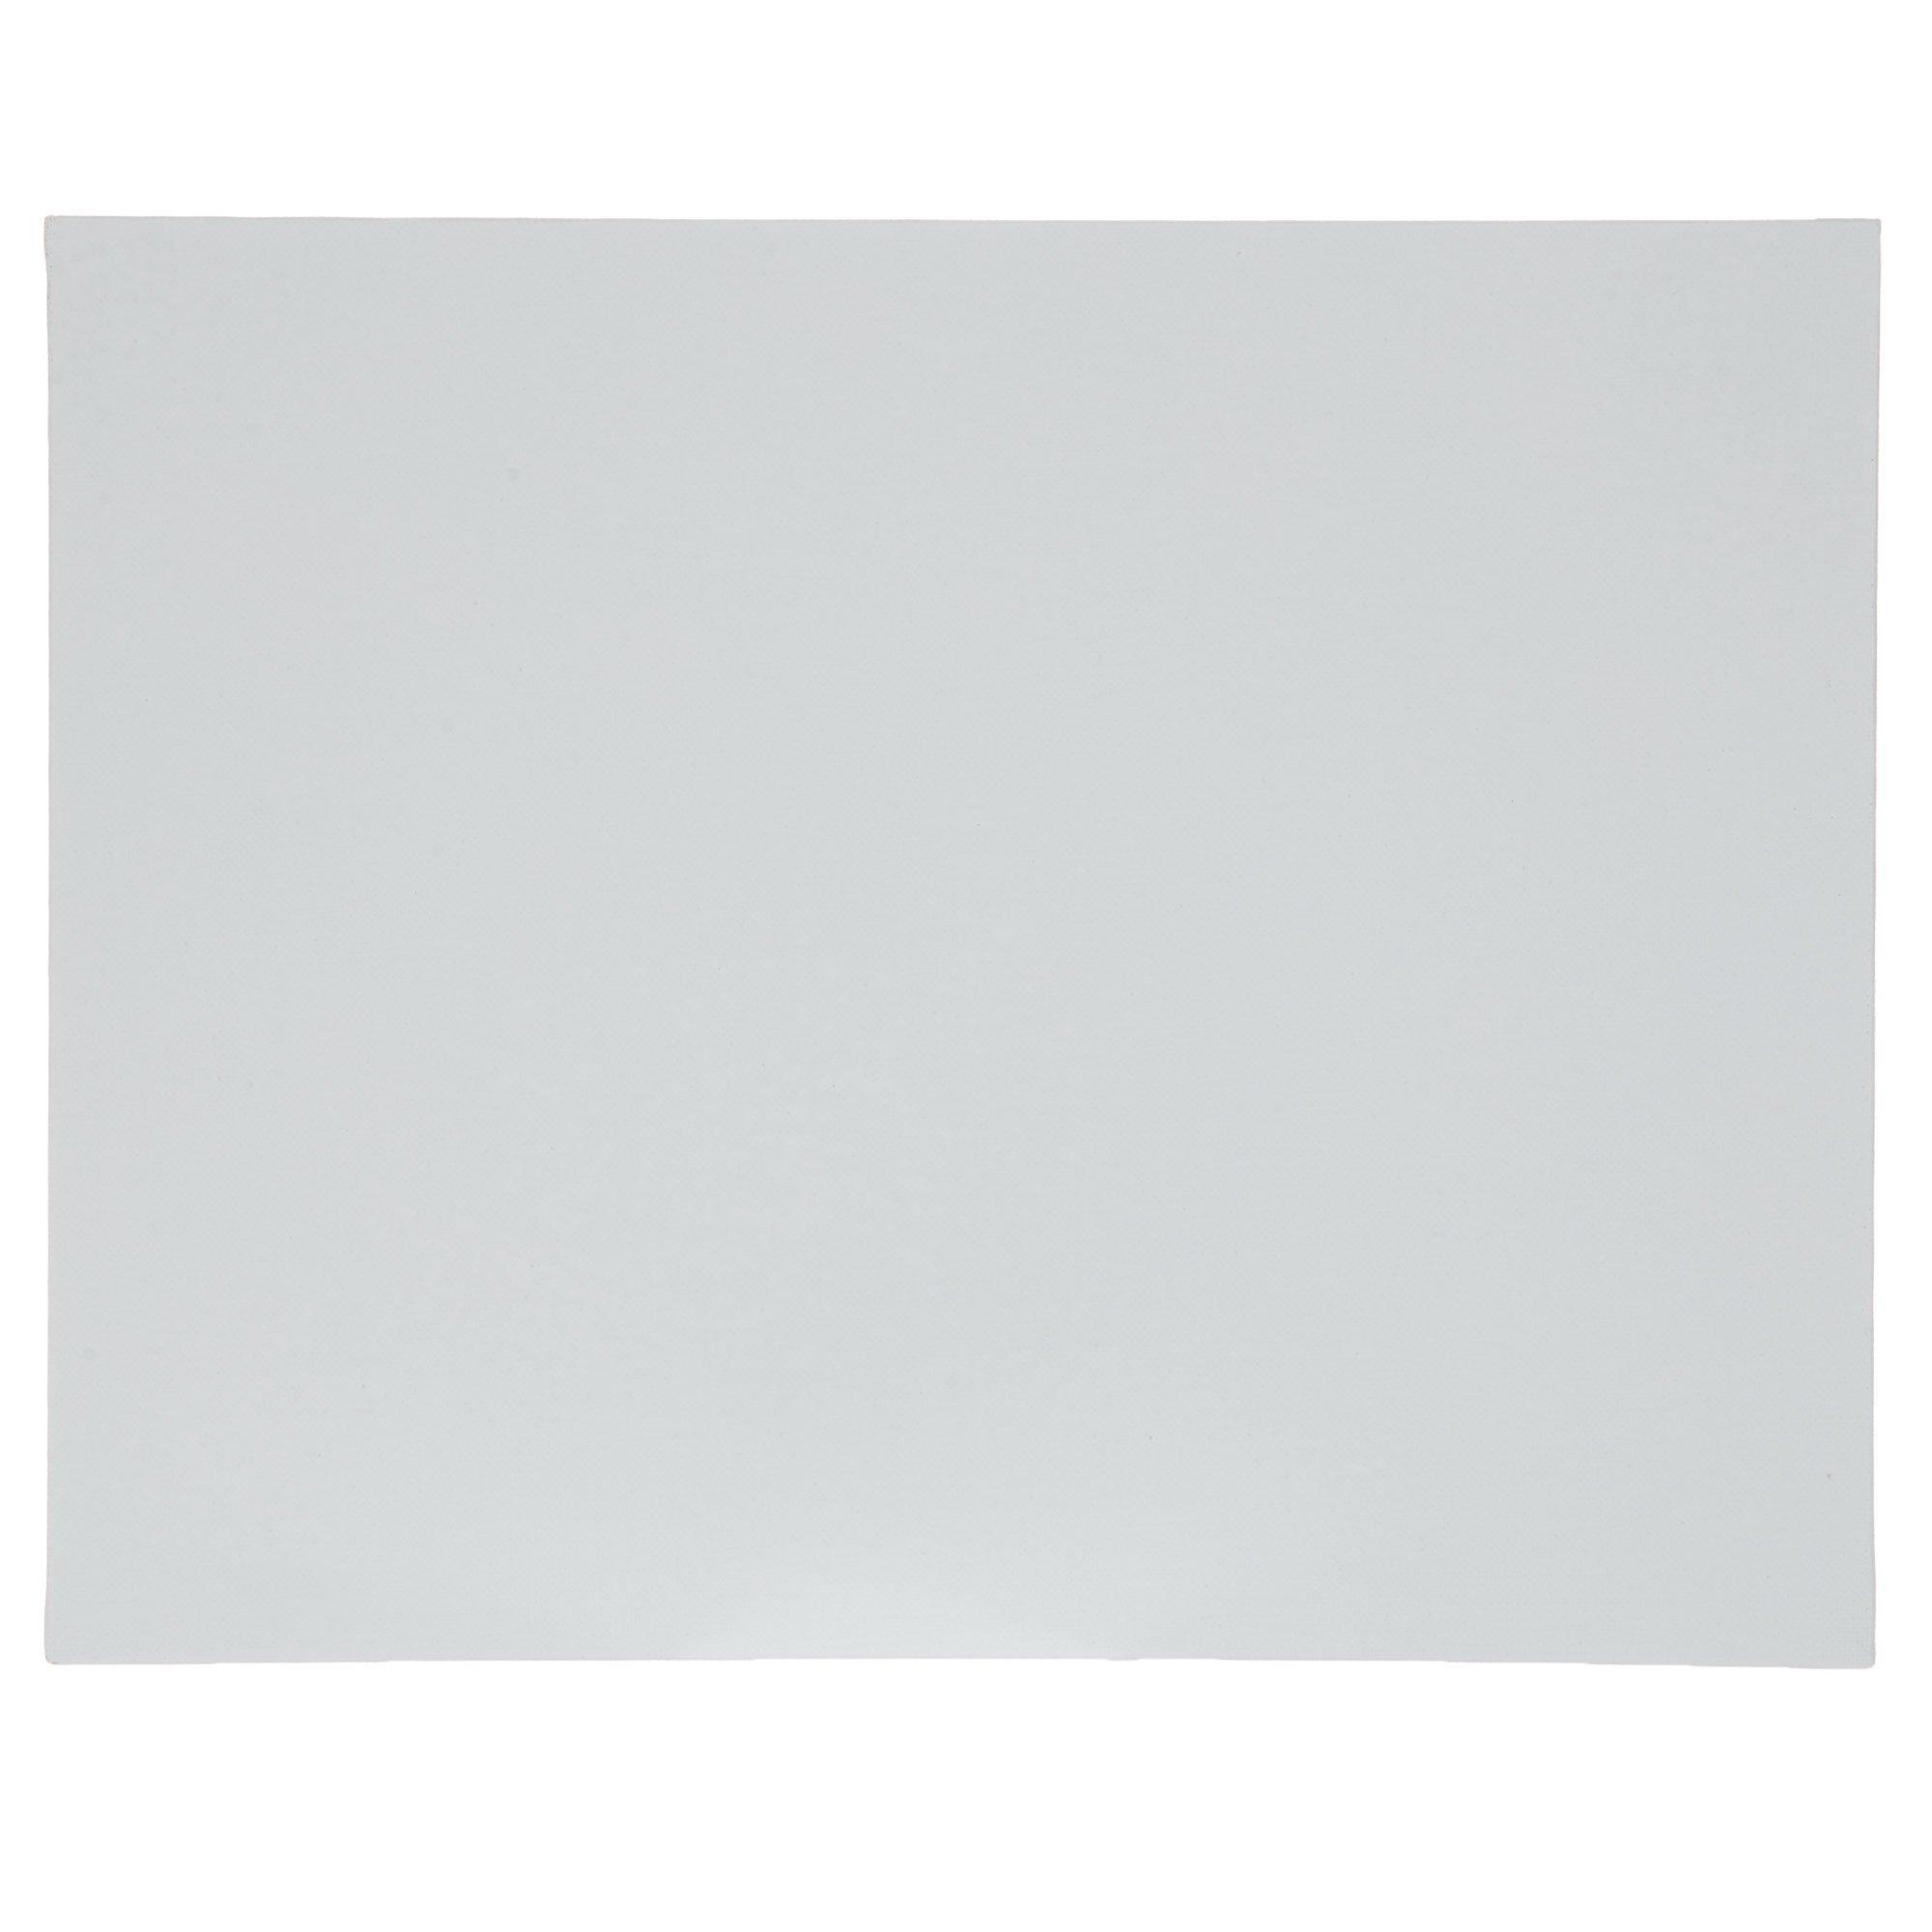 Canvas Panels 18x24 inch 6-Pack, 10 oz Double Primed Acid-Free 100% Cotton Large Canvases for Painting, Blank Flat Canvas Board for Oil Acrylics